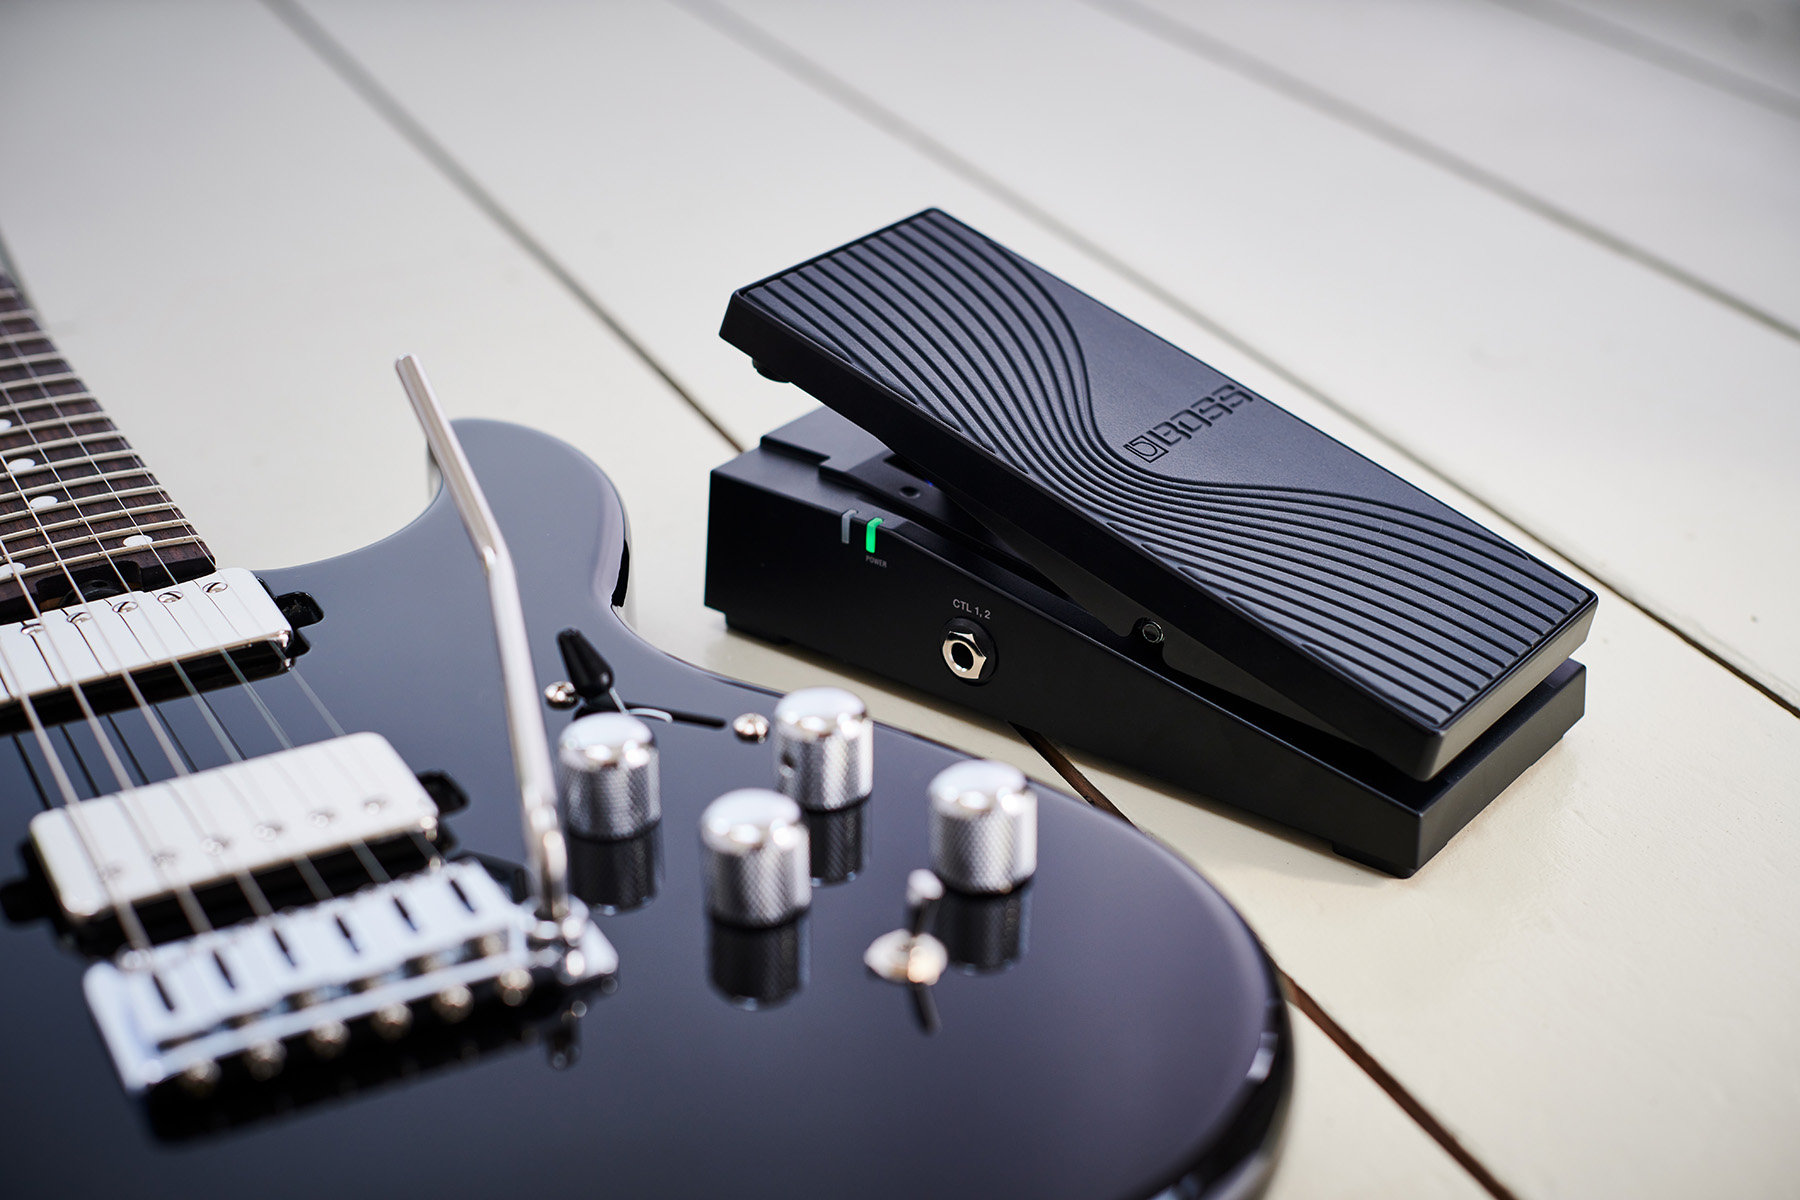 Boss's latest guitar has a built-in synth and Bluetooth pedal control